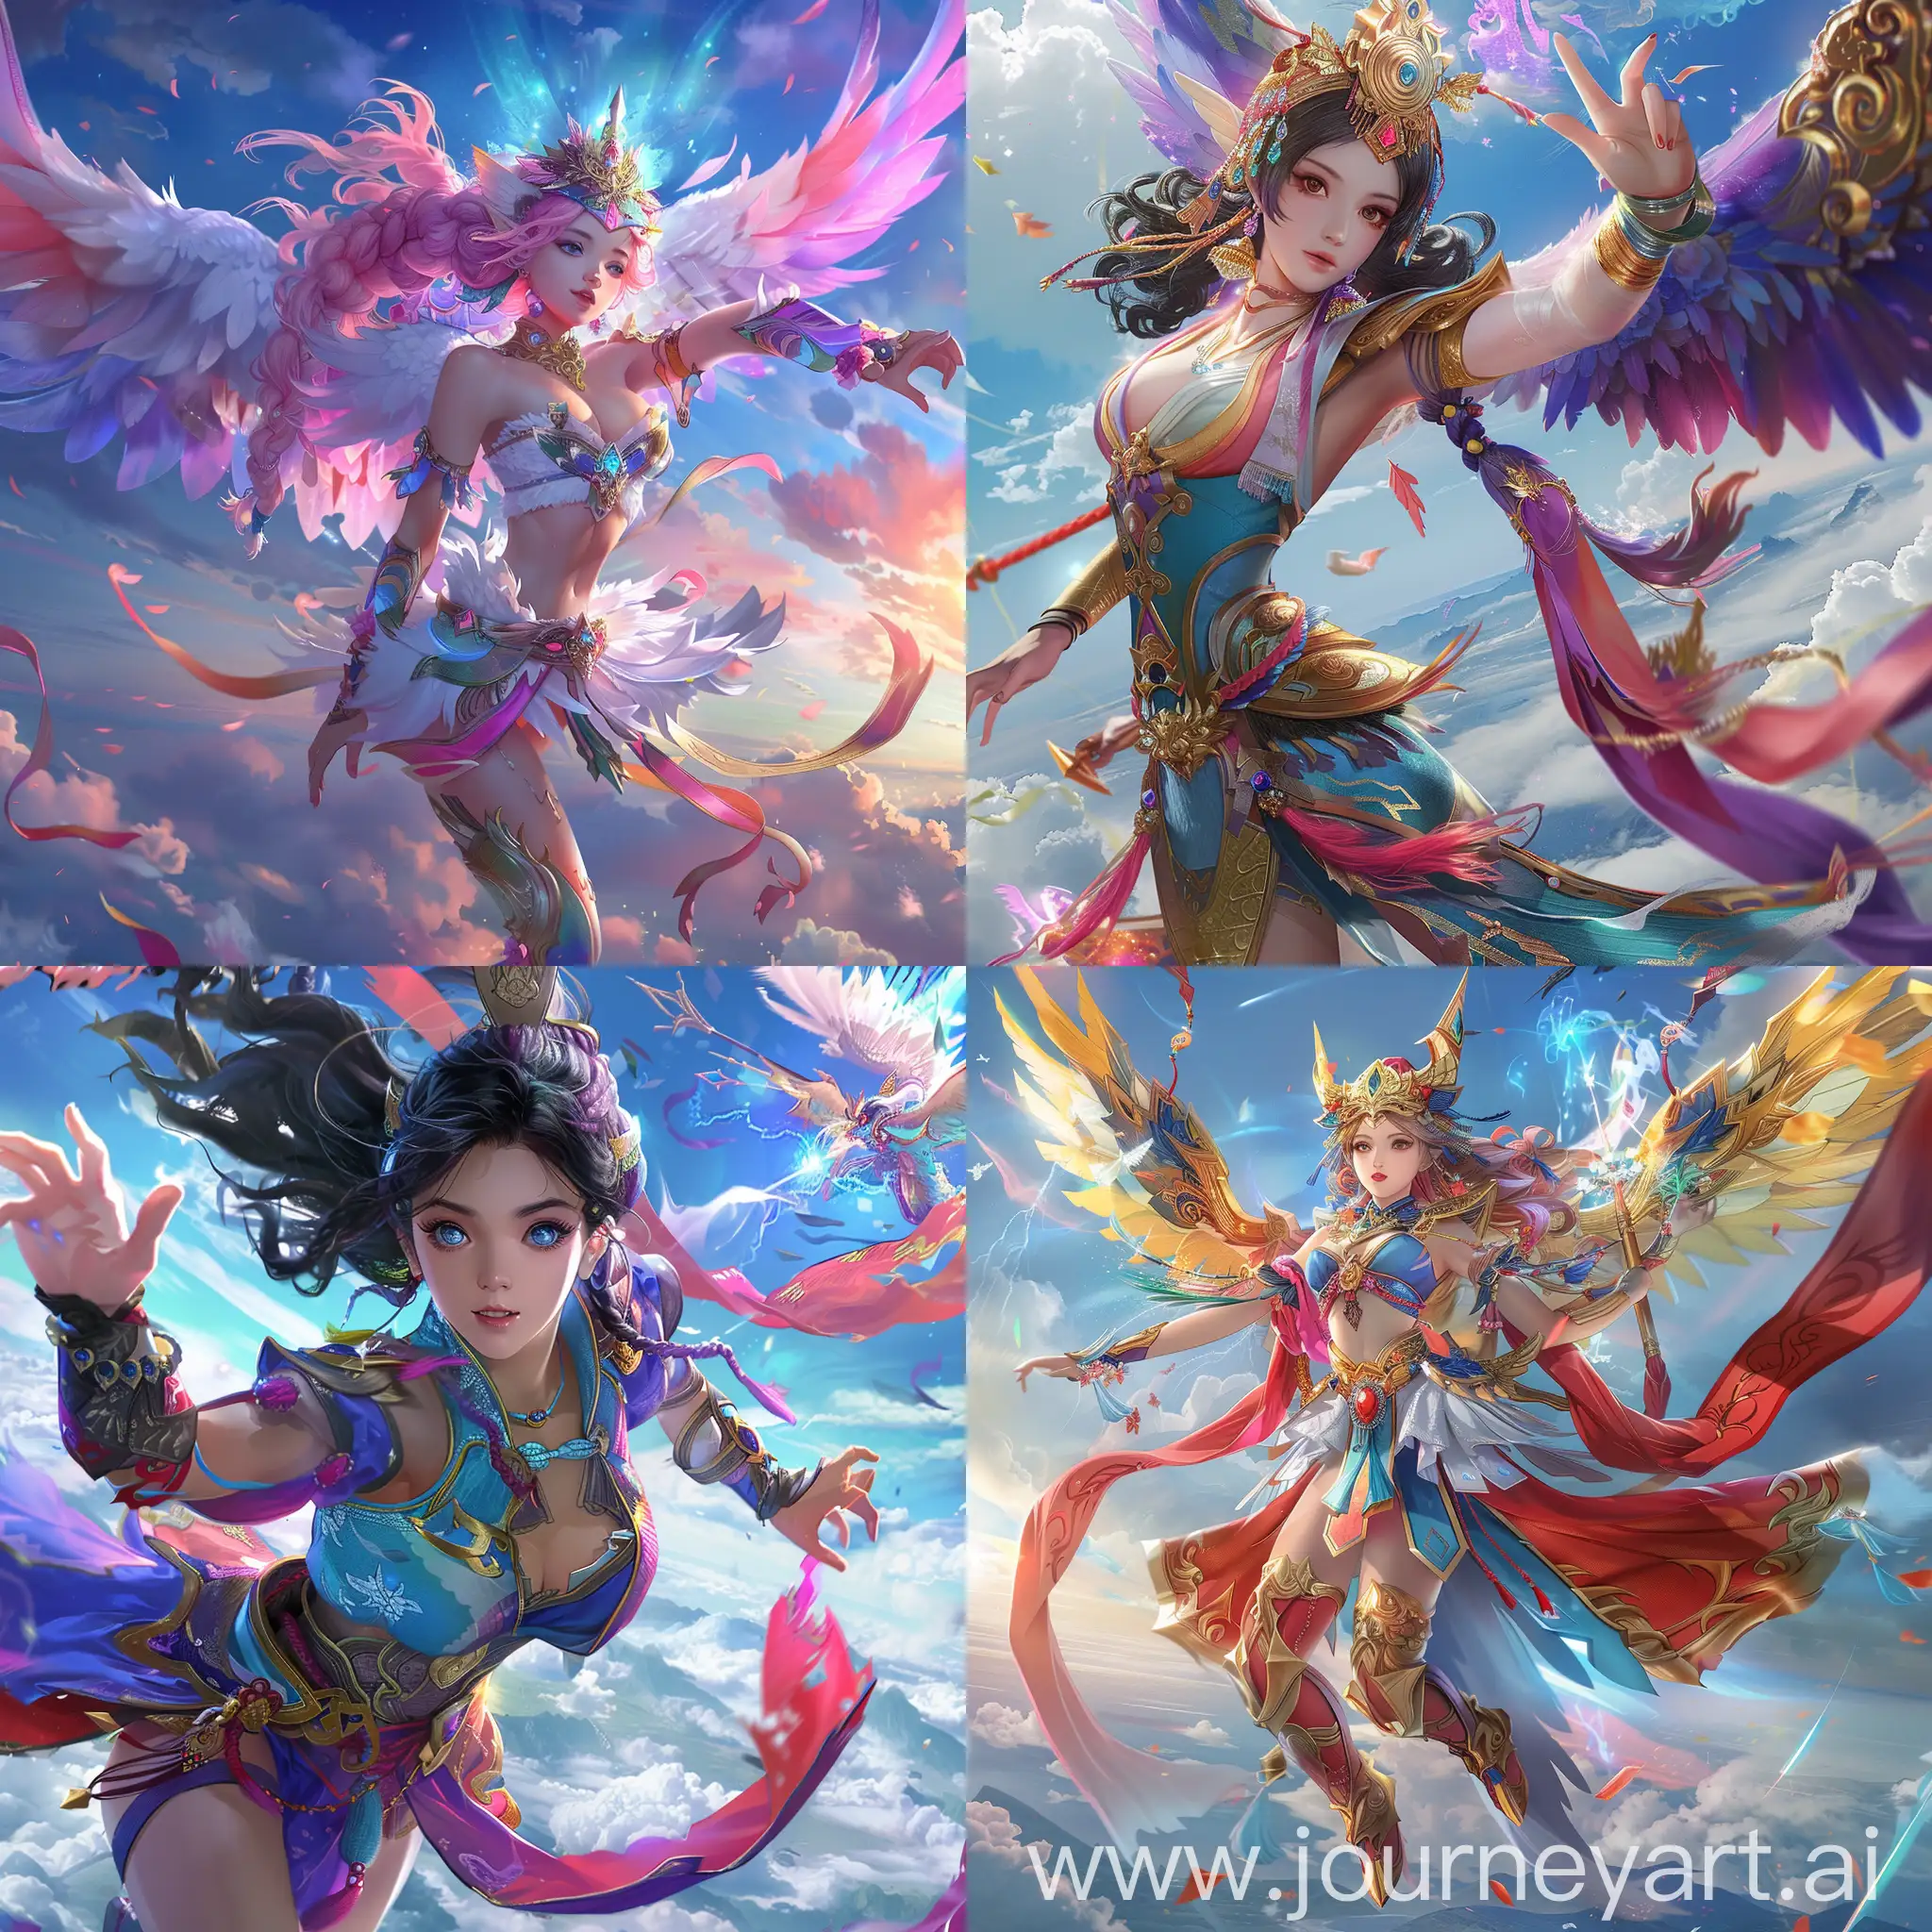 Detailed anime-style character, colorful costume, magical powers, flying in the sky, epic battle, vibrant background, high-quality, dynamic poses, photorealistic, mystical elements, 16:9 aspect ratio